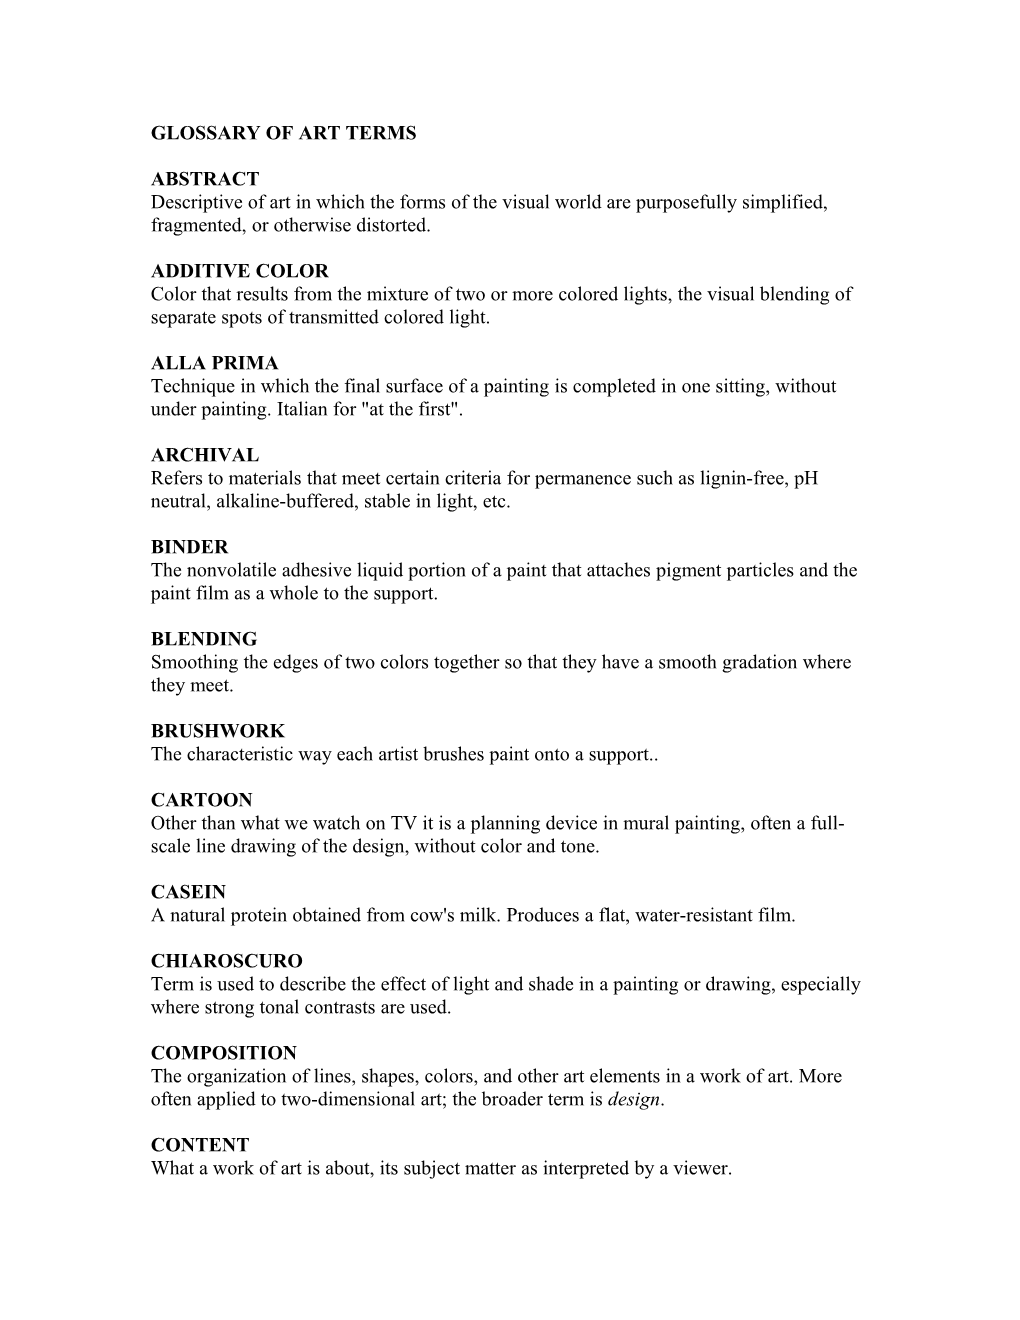 Glossary of Art Terms